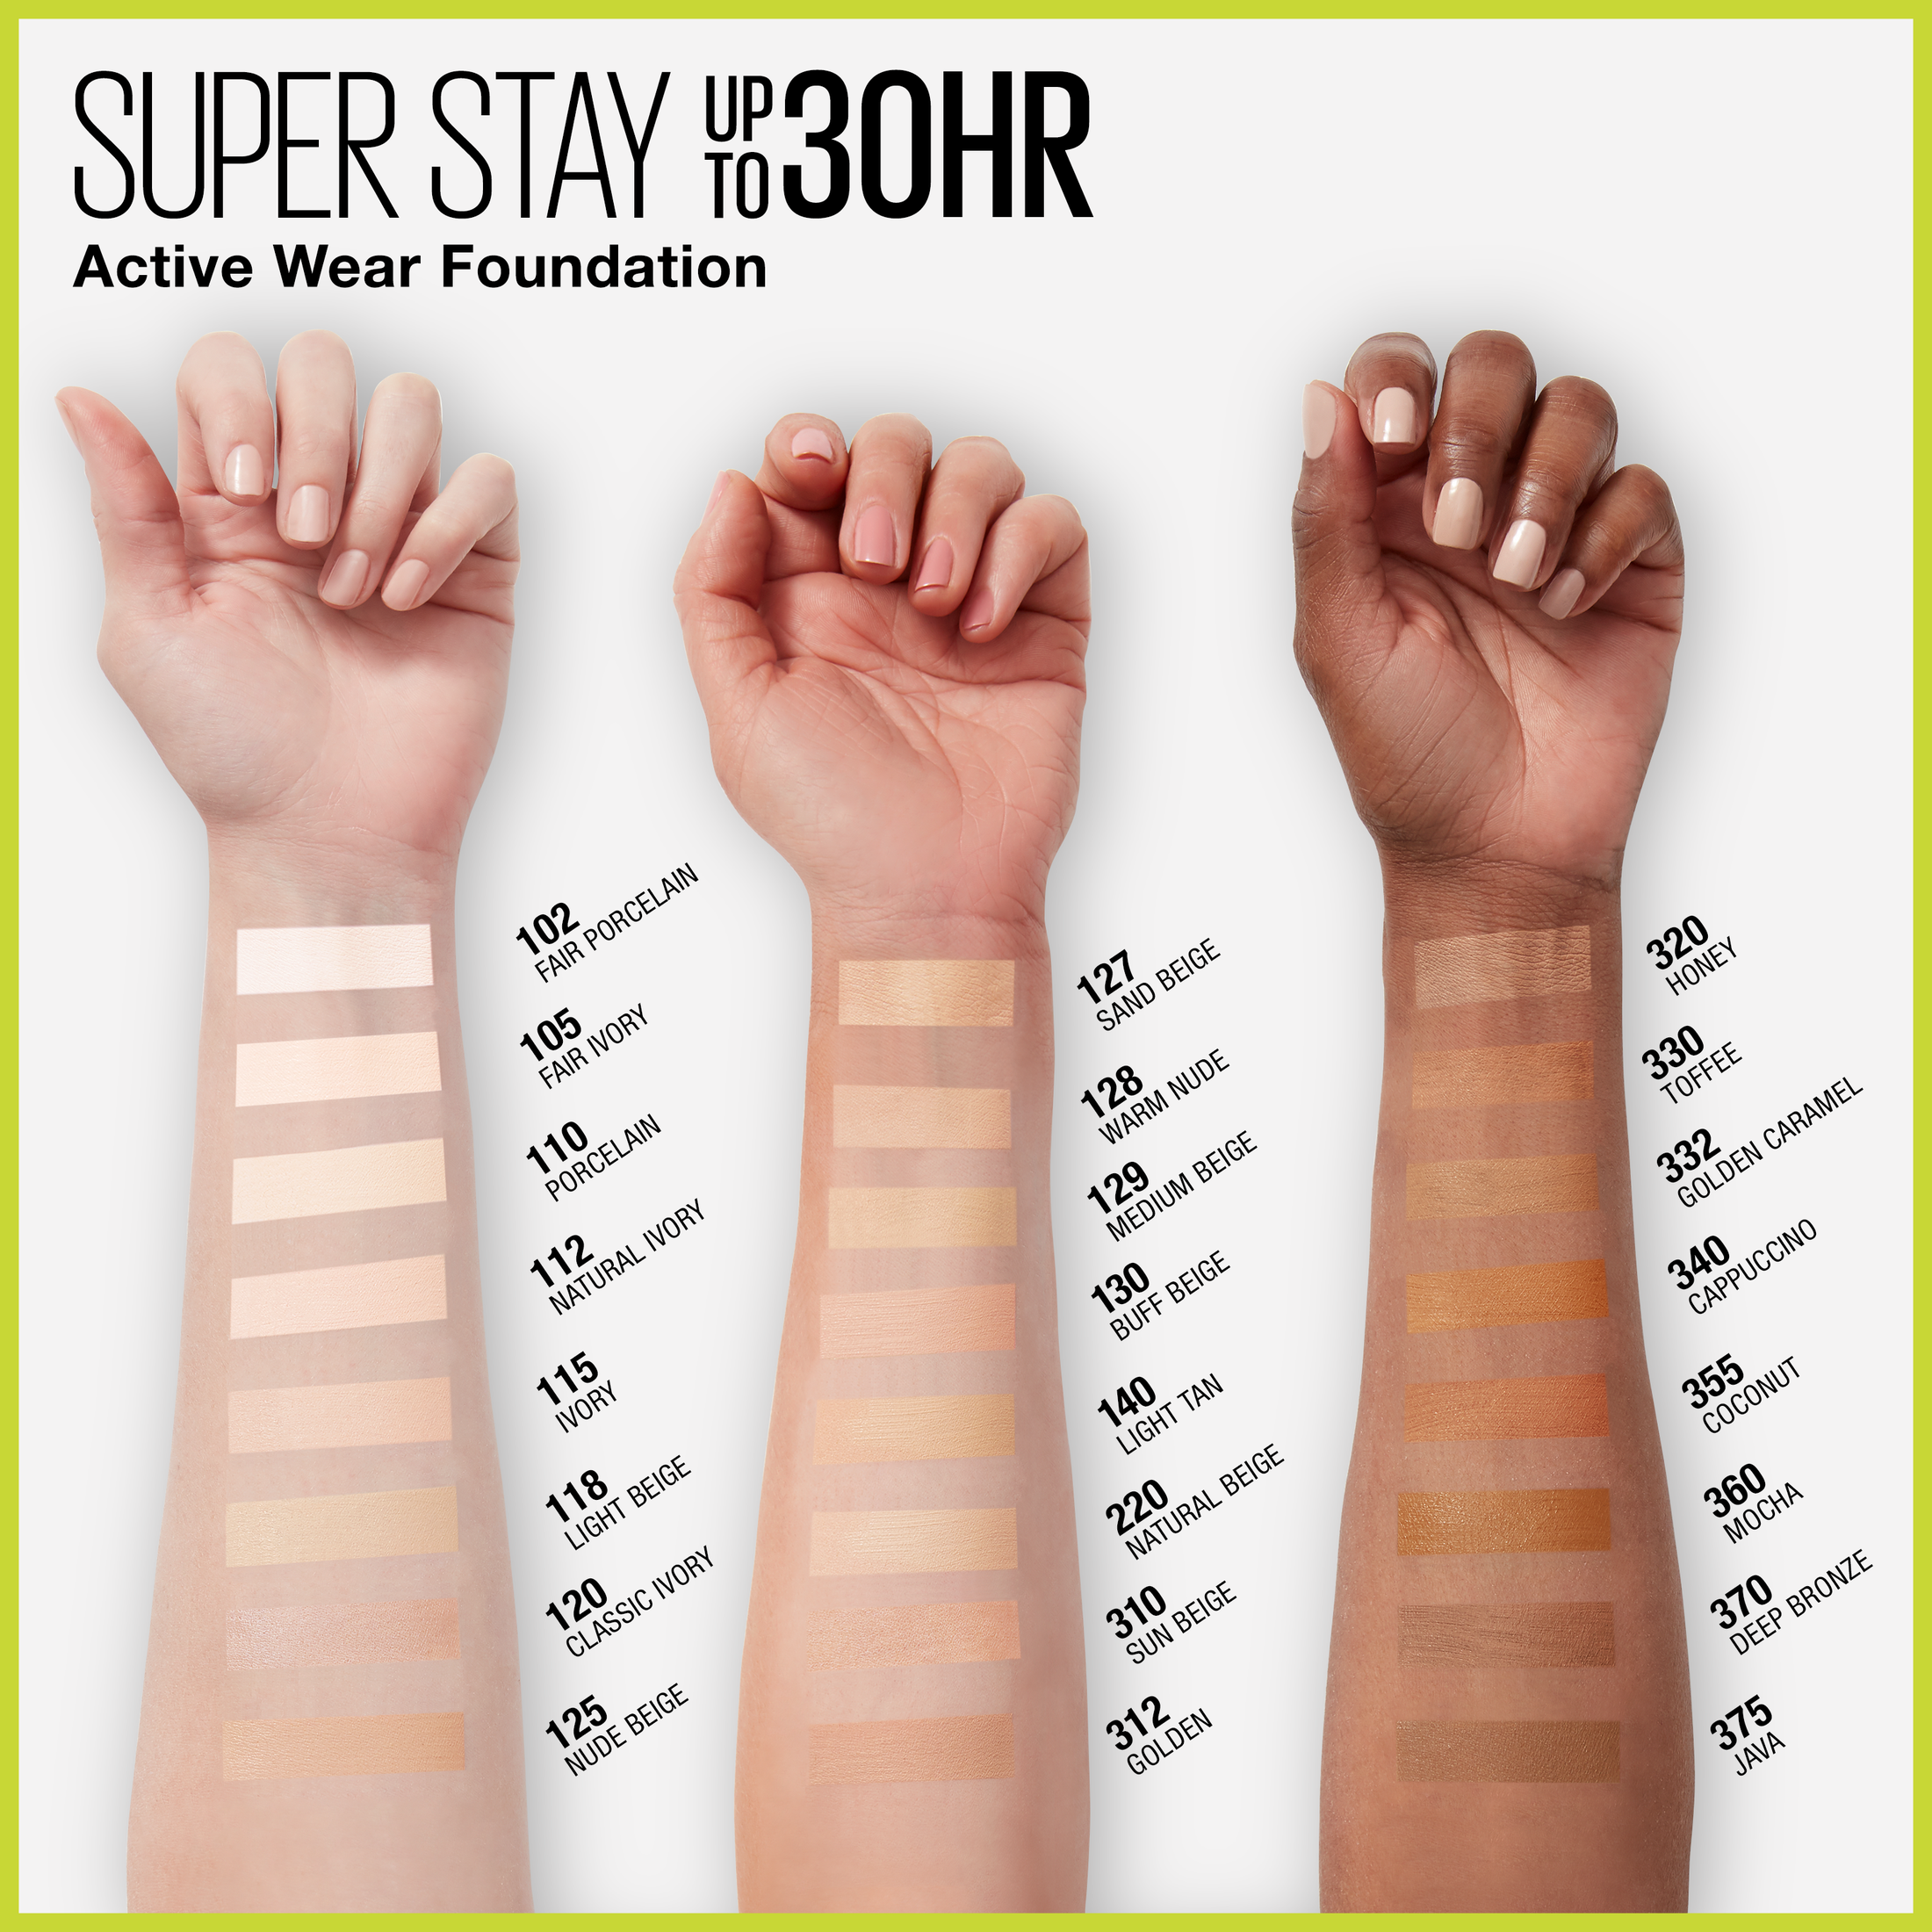 Maybelline Super Stay Liquid Foundation Makeup, Full Coverage, 120 Classic Ivory, 1 fl oz - image 4 of 8